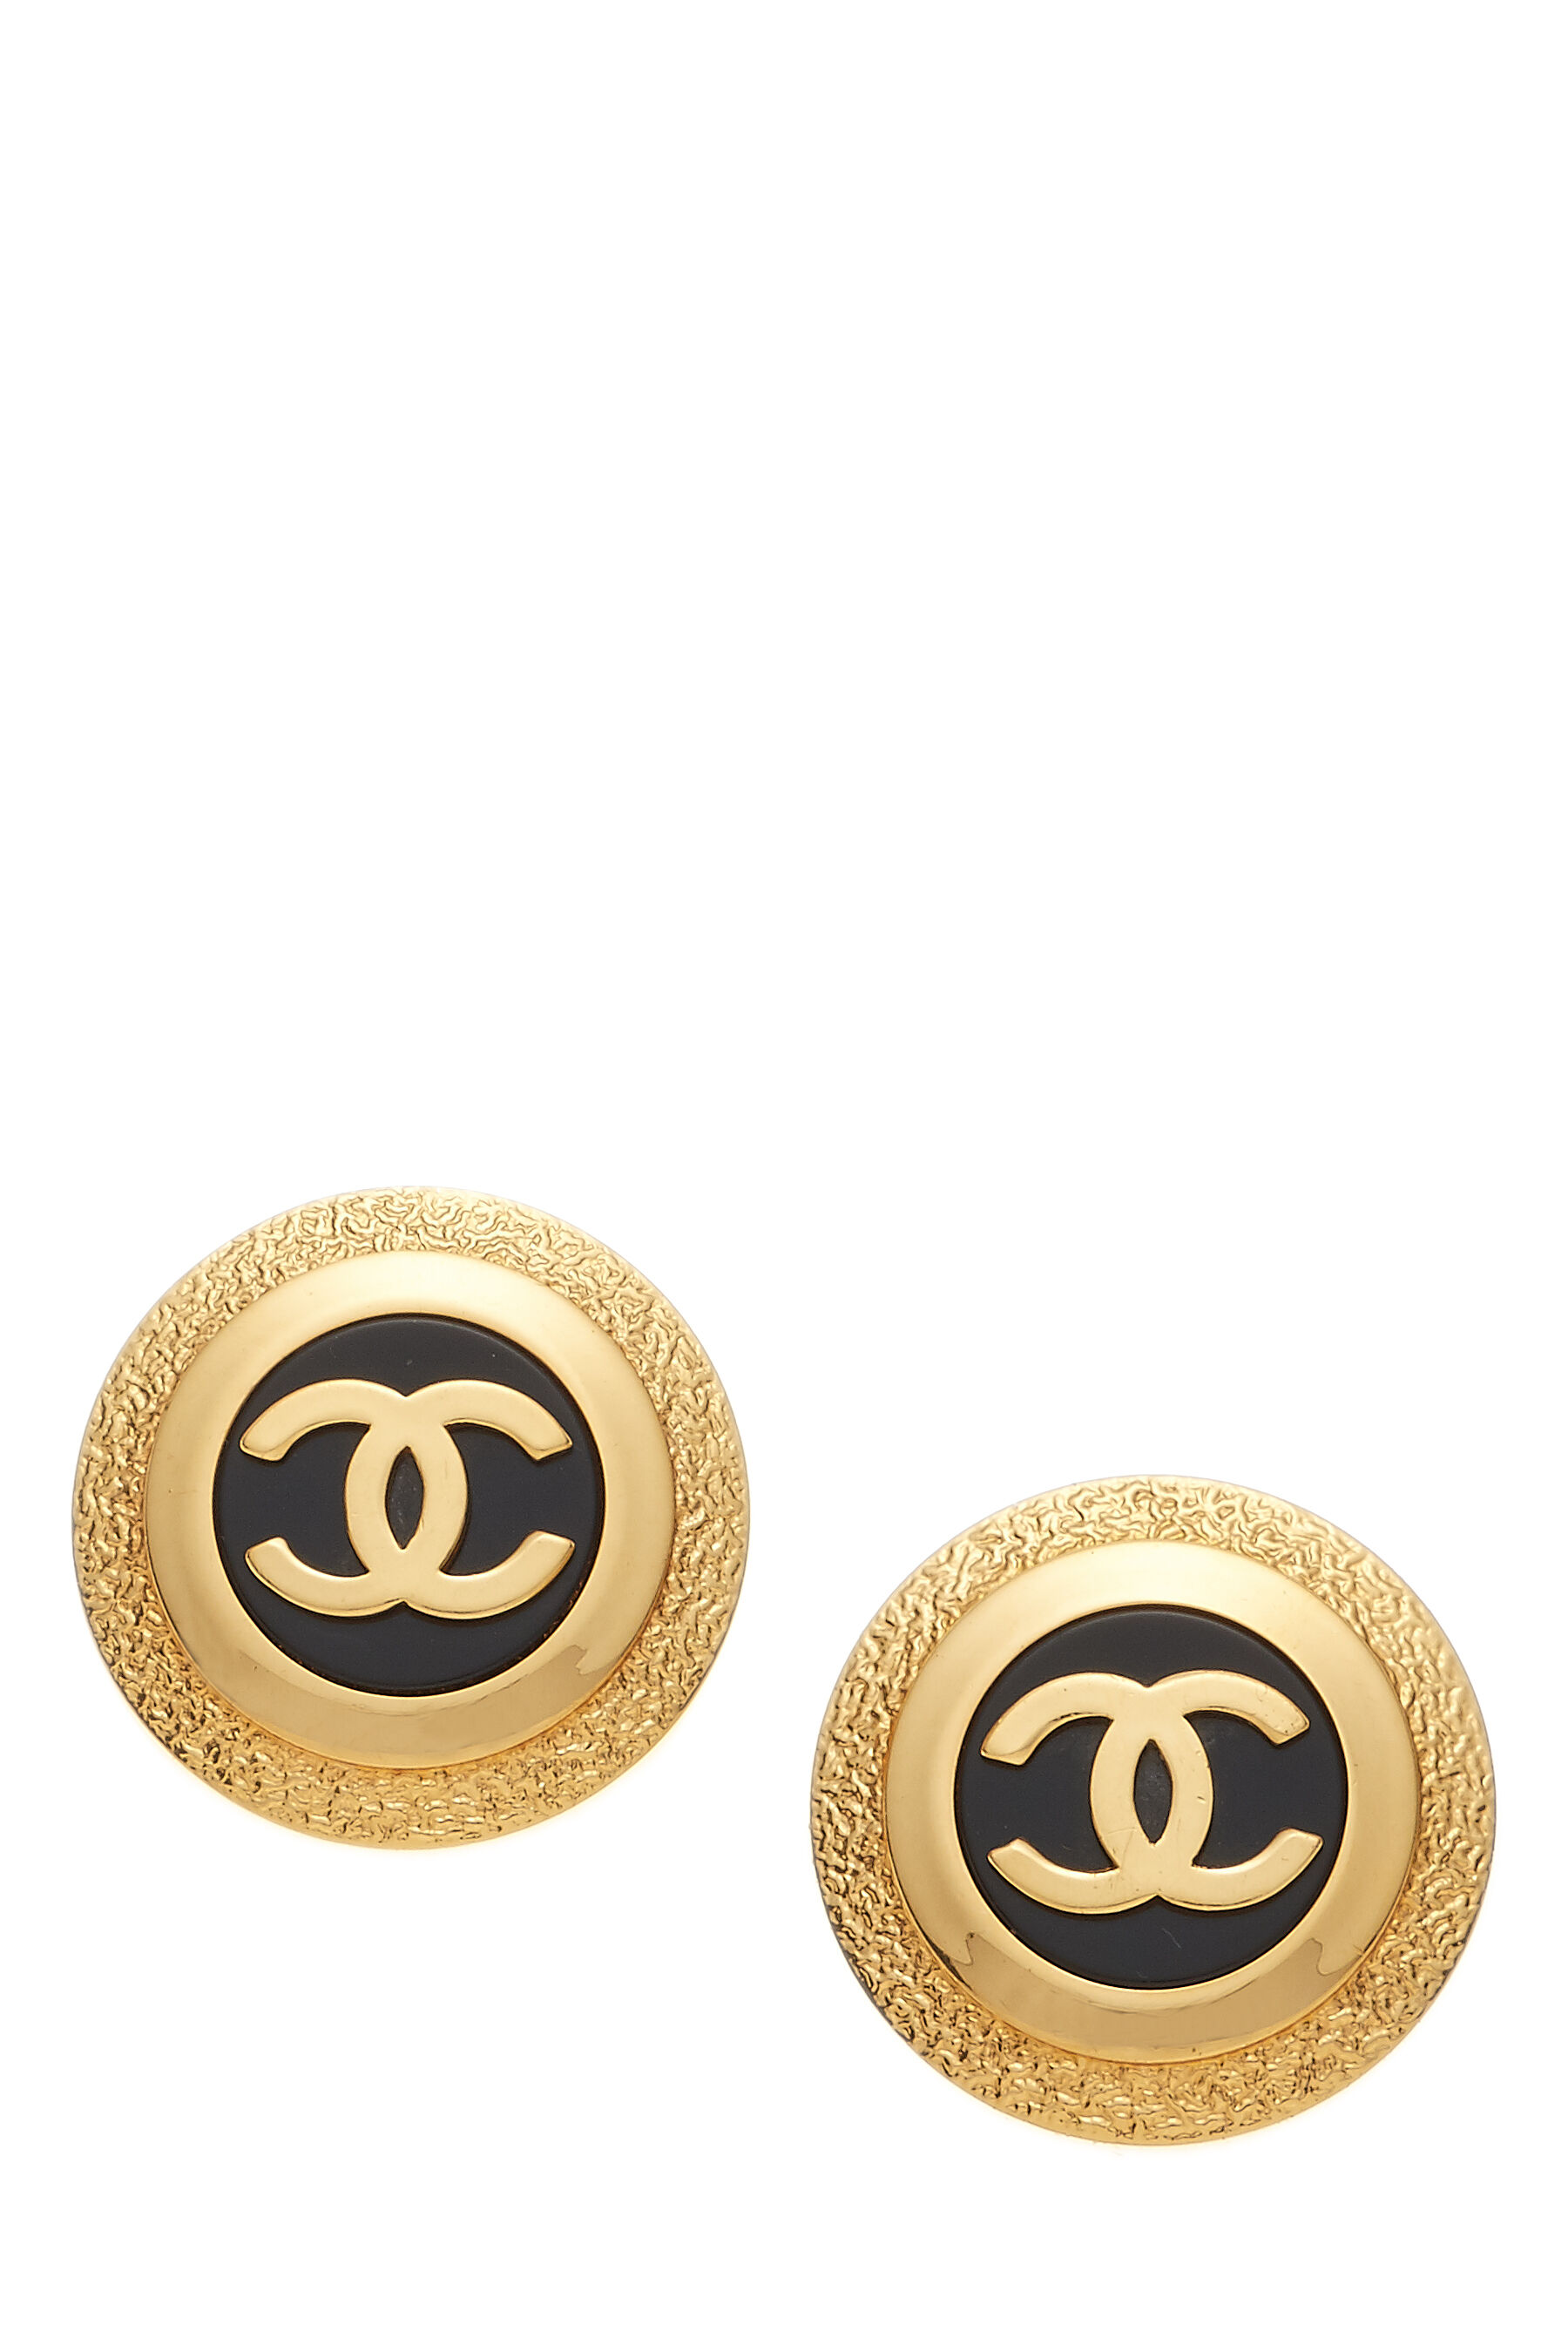 Gold & Black 'CC' Button Earrings Large